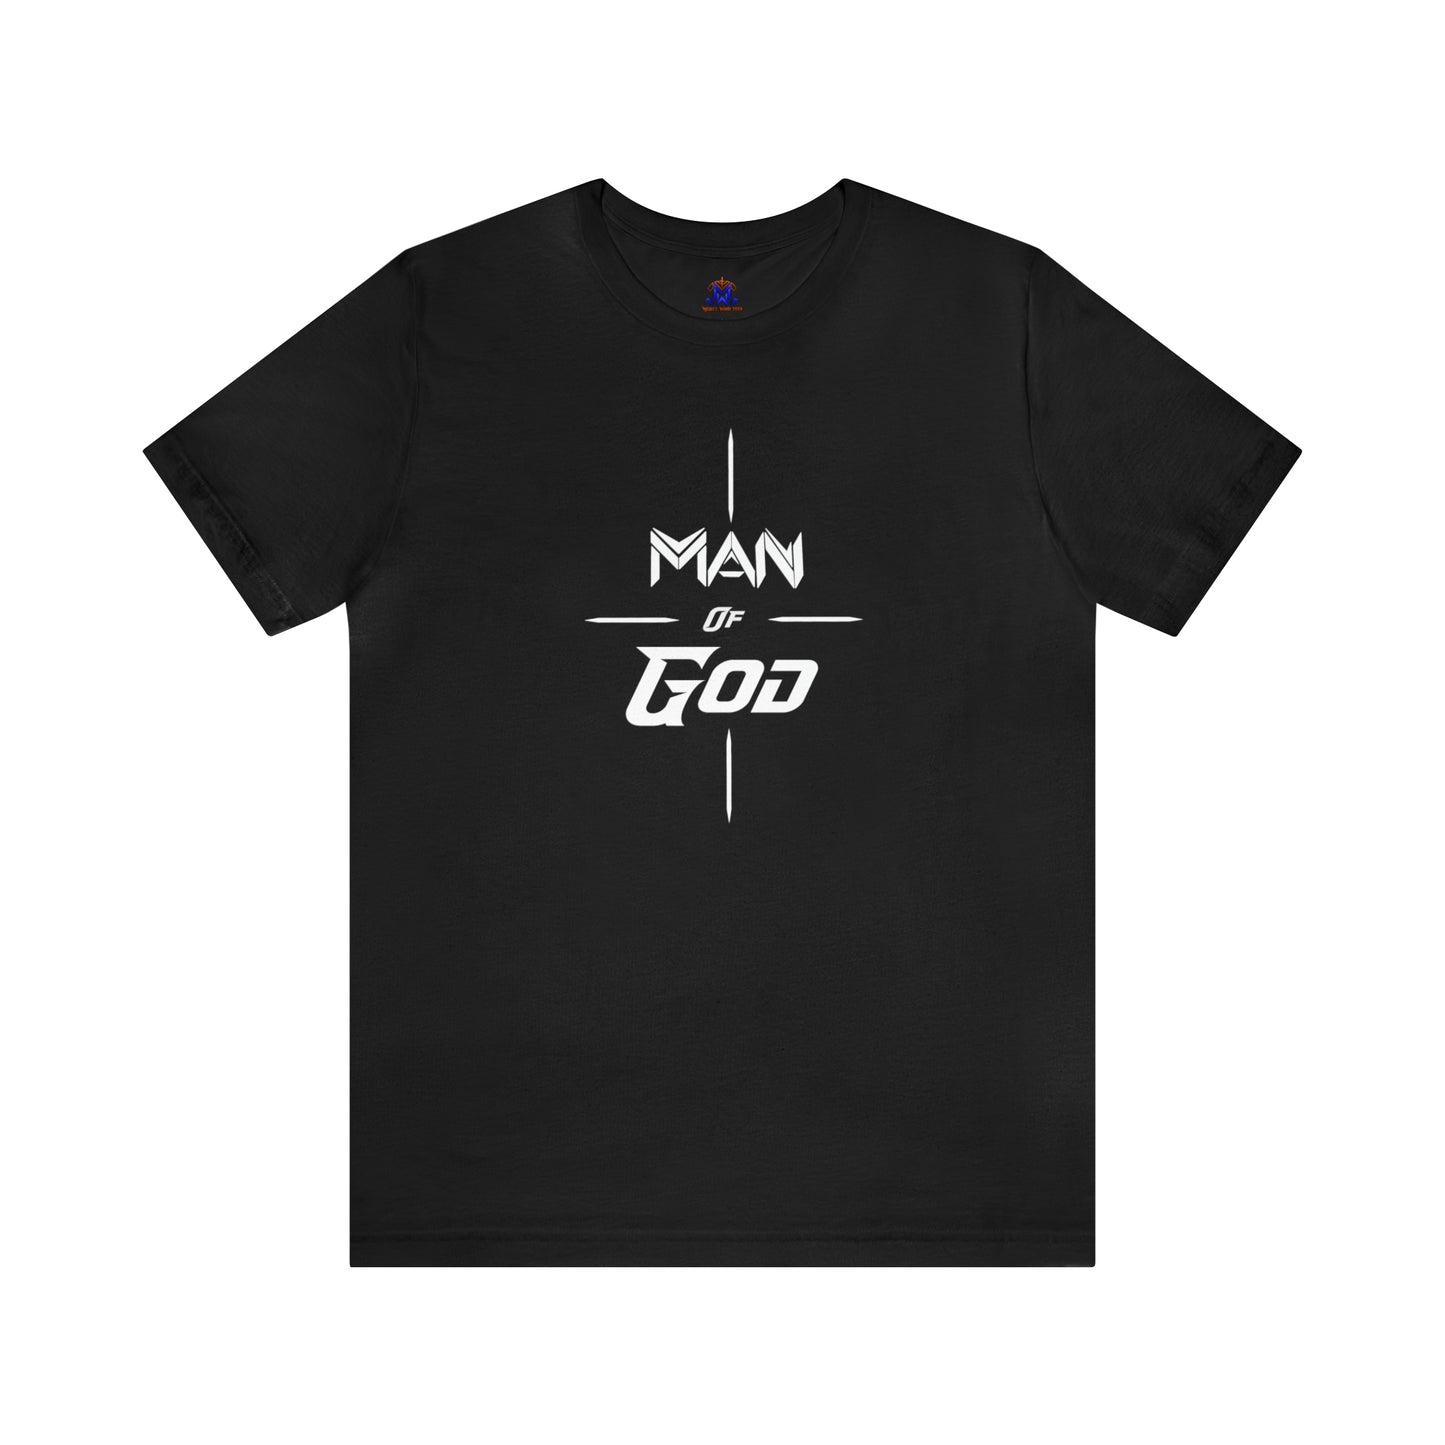 Man of God-(Available in more colors)